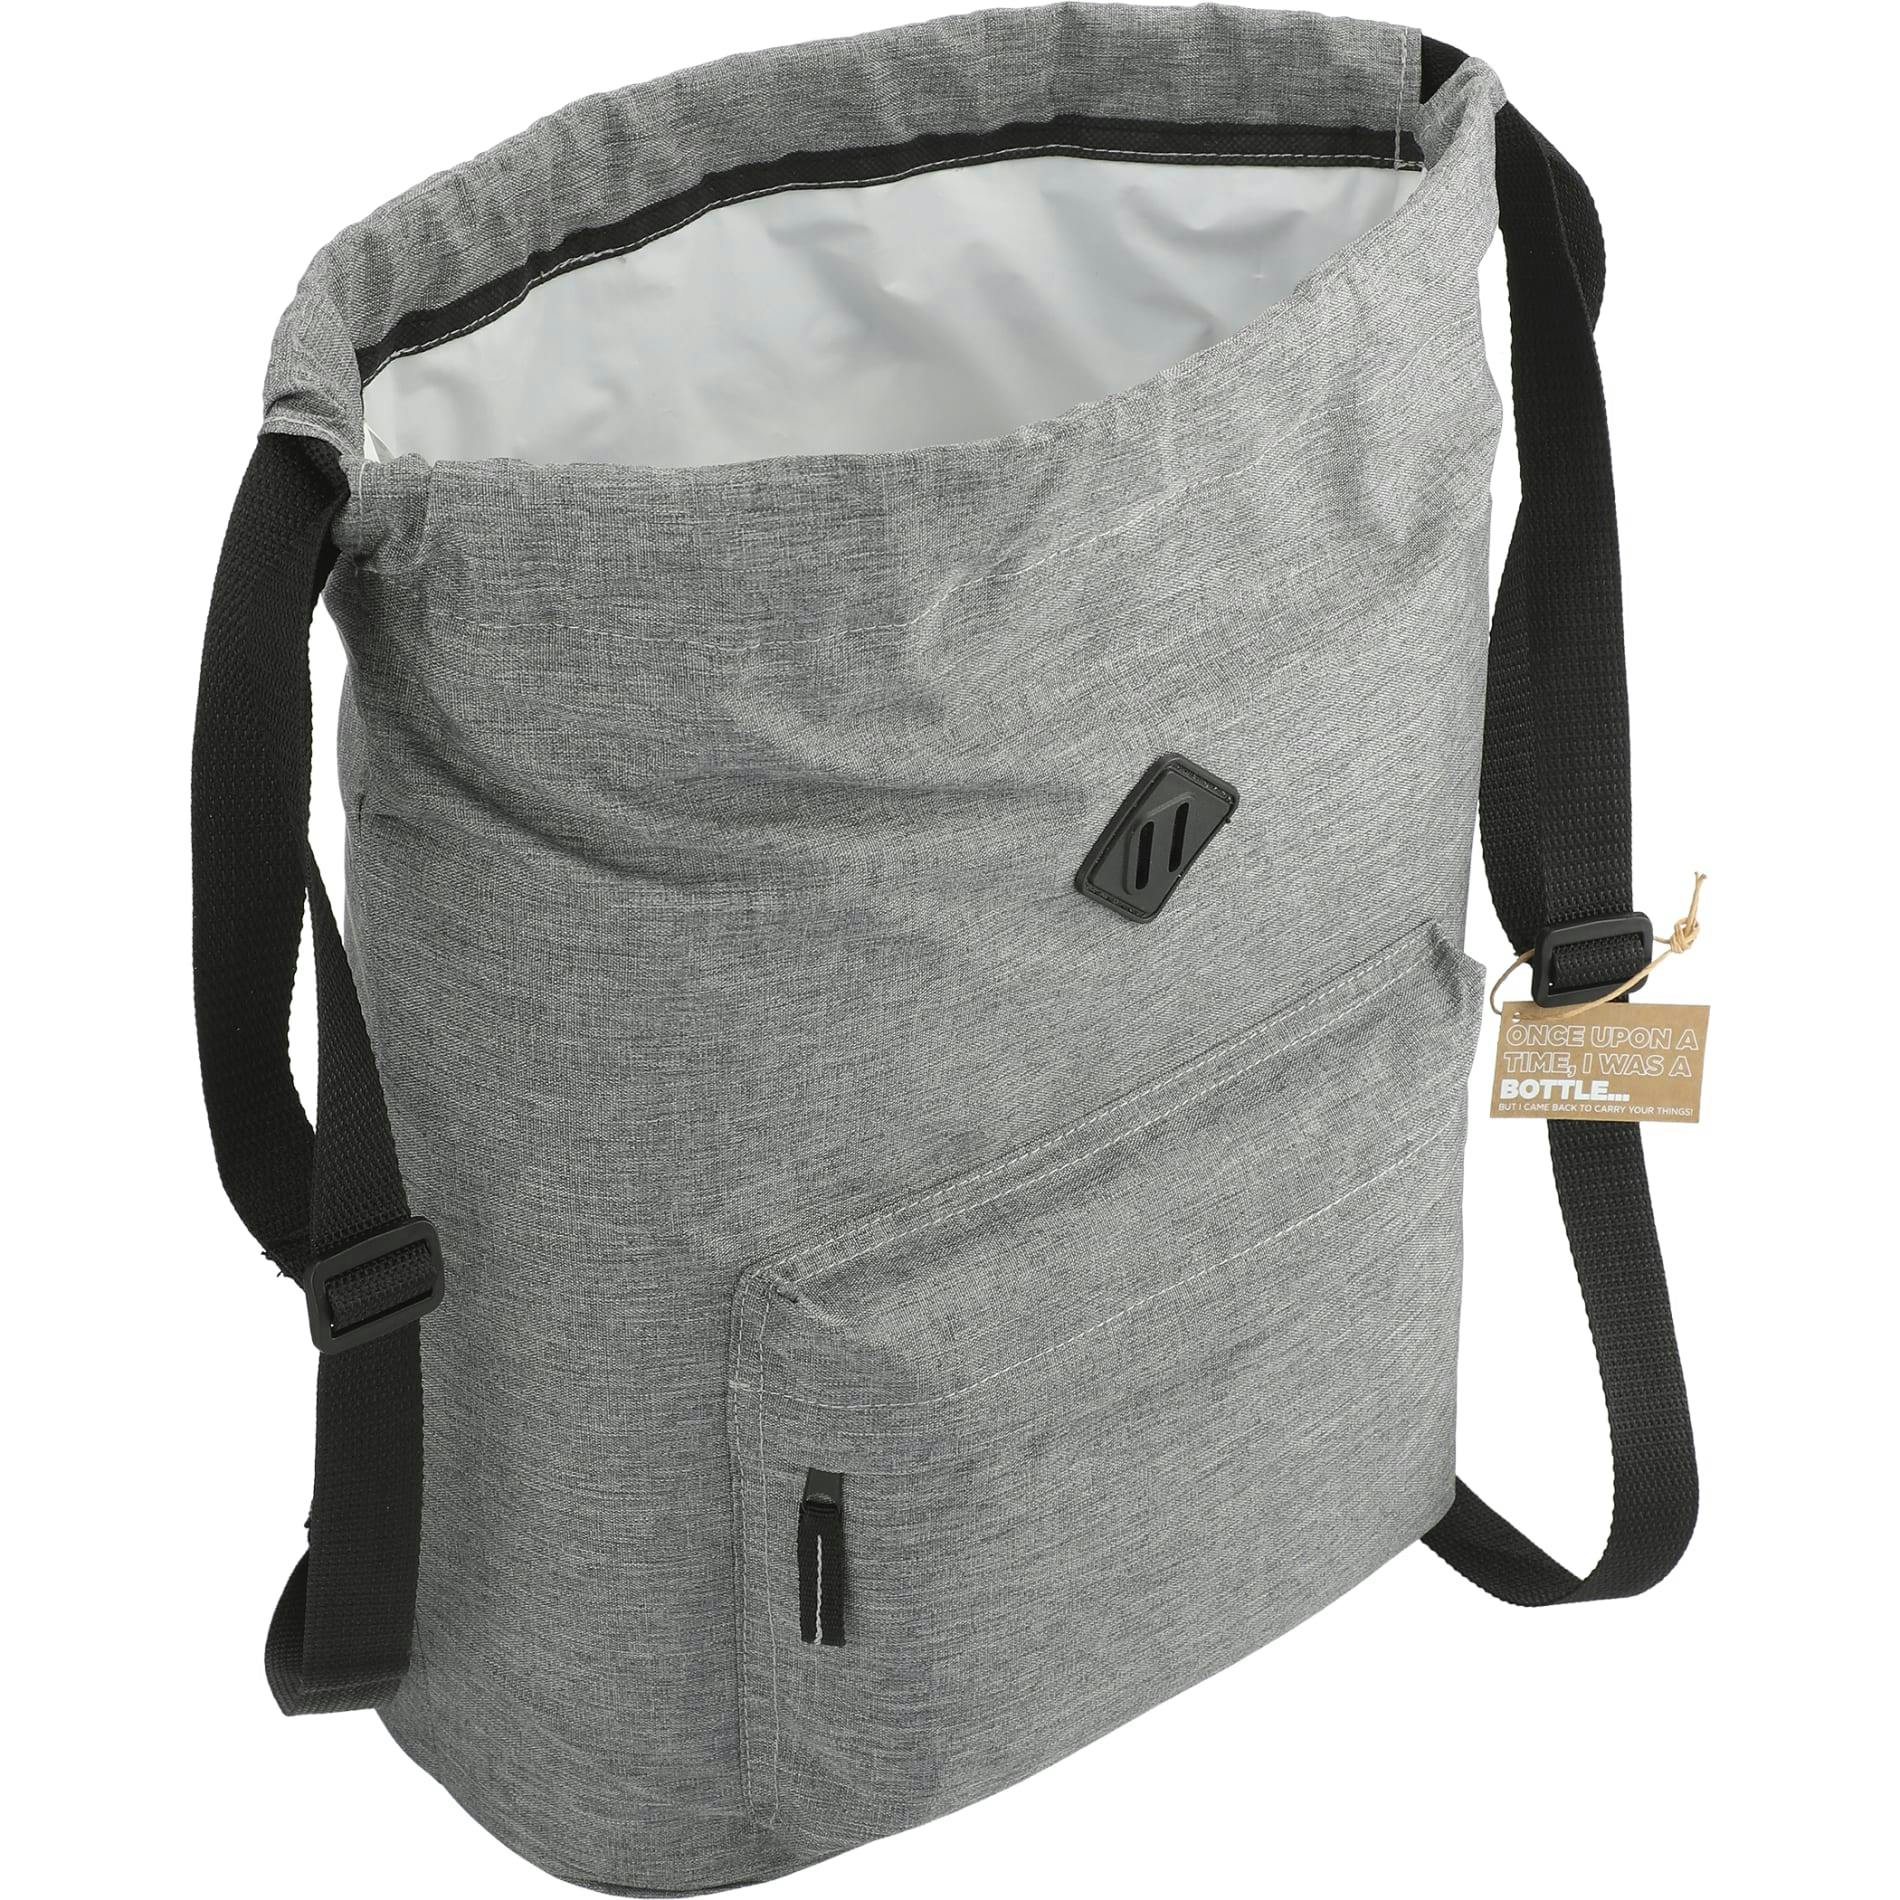 Essentials Recycled Insulated Drawstring - additional Image 2